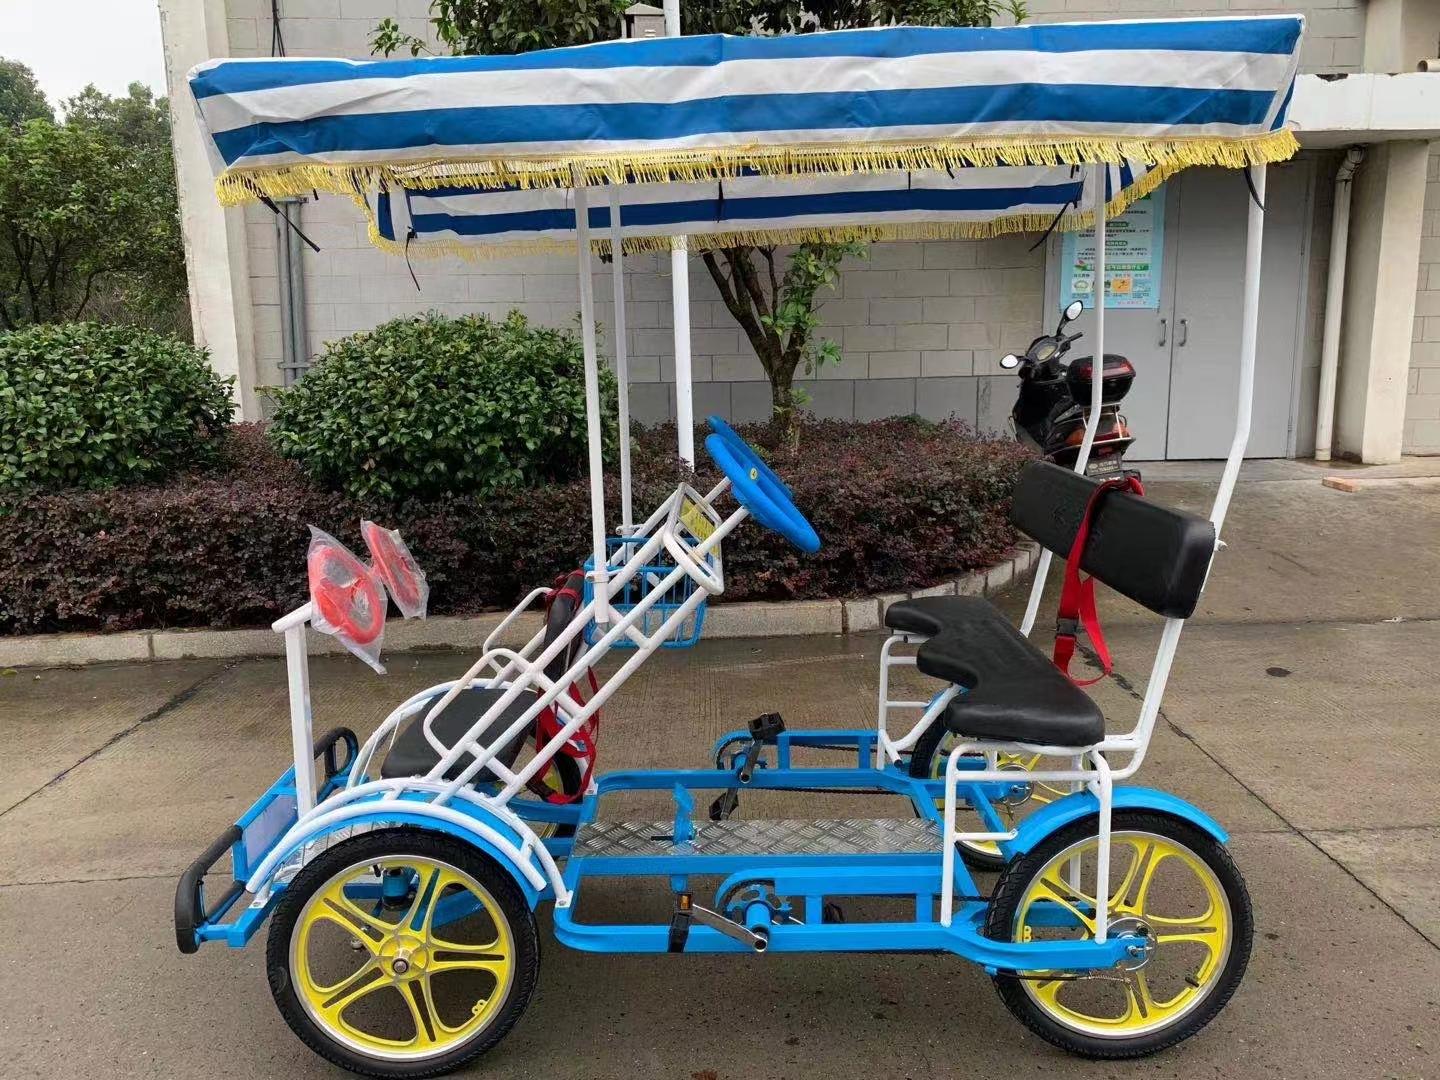 4 person four wheel quadricycle surrey electric sightseeing car